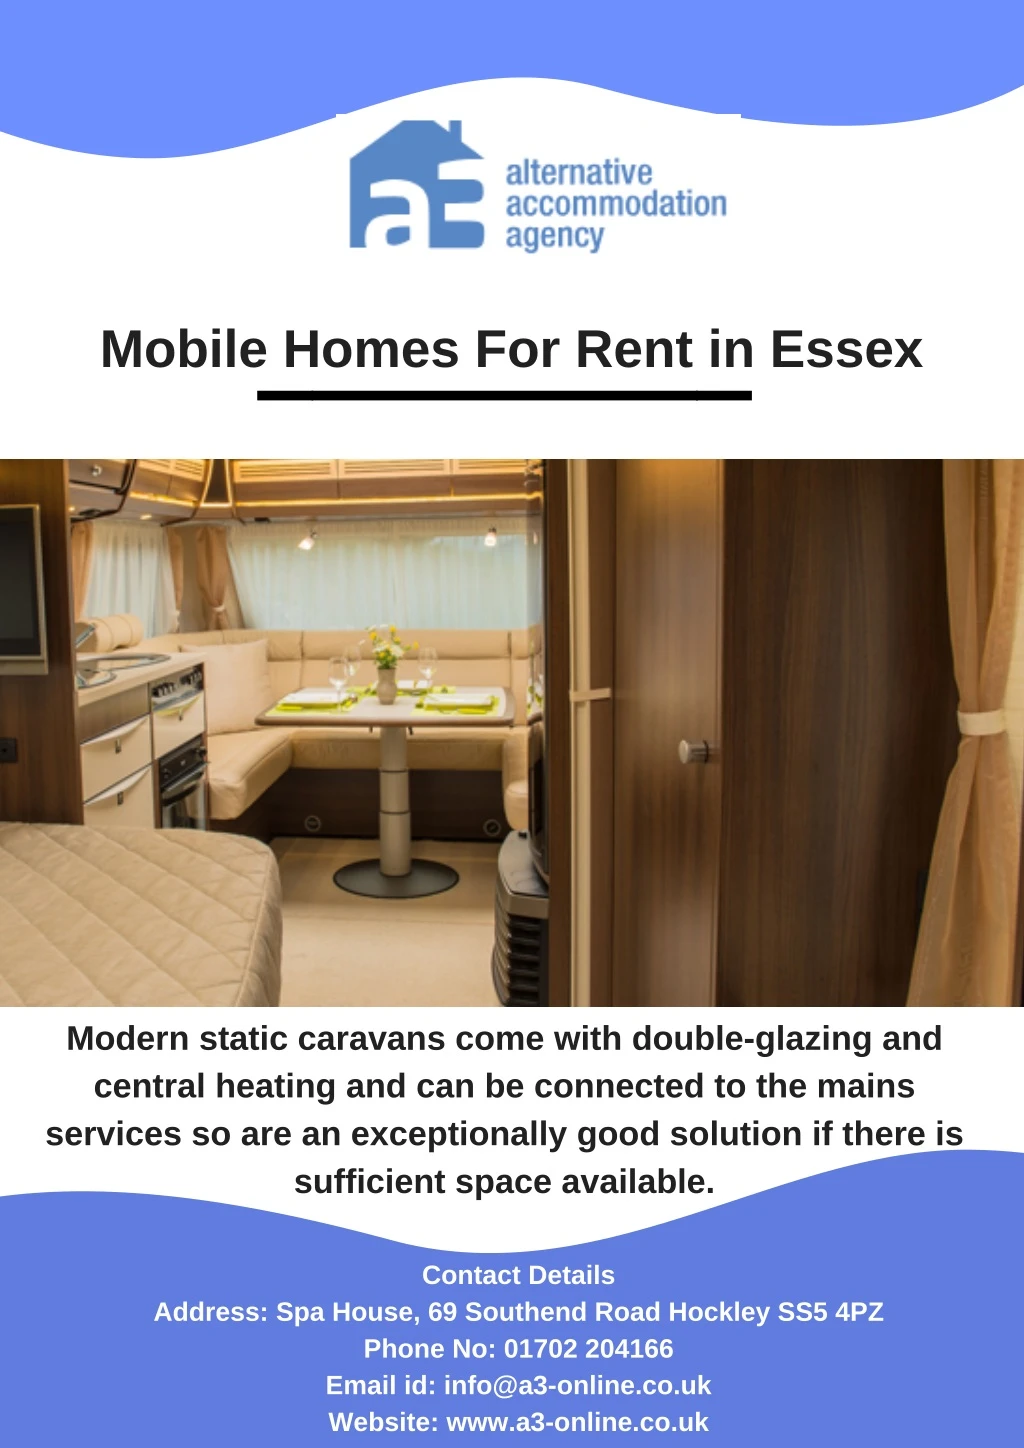 mobile homes for rent in essex